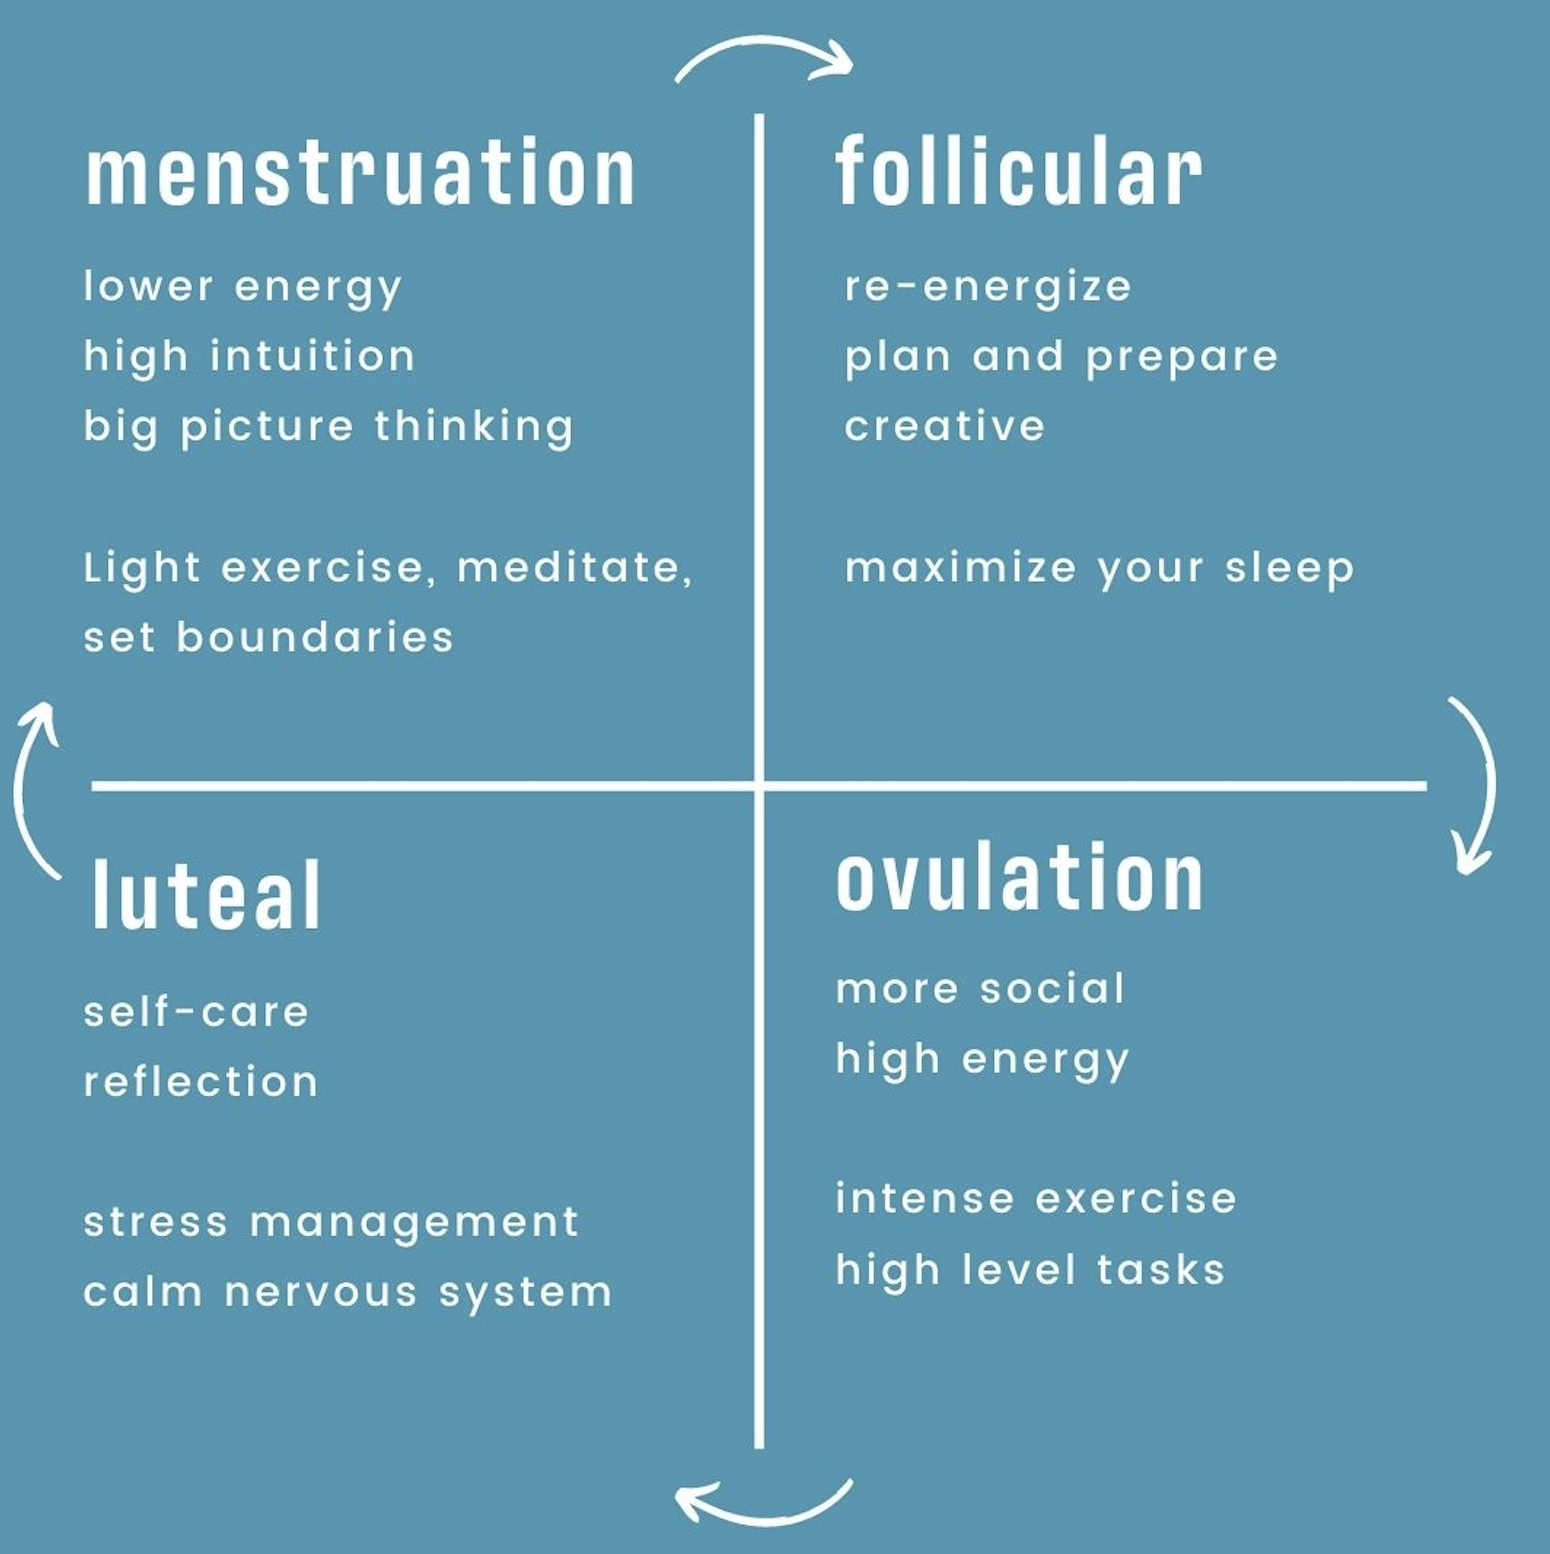 MENSTRUATION:
- lower energy
- higher intuition
- big picture thinking
- light exercise, medidate, set boundaries

FOLLICULAR:
- re-energize
- plan and prepare
- creative
- maximize your sleep

OVULATION:
- more social
- high energy
- intense exercise and high-level tasks

LUTEAL:
- self-care
- reflection
- stress management
-calm nervous system